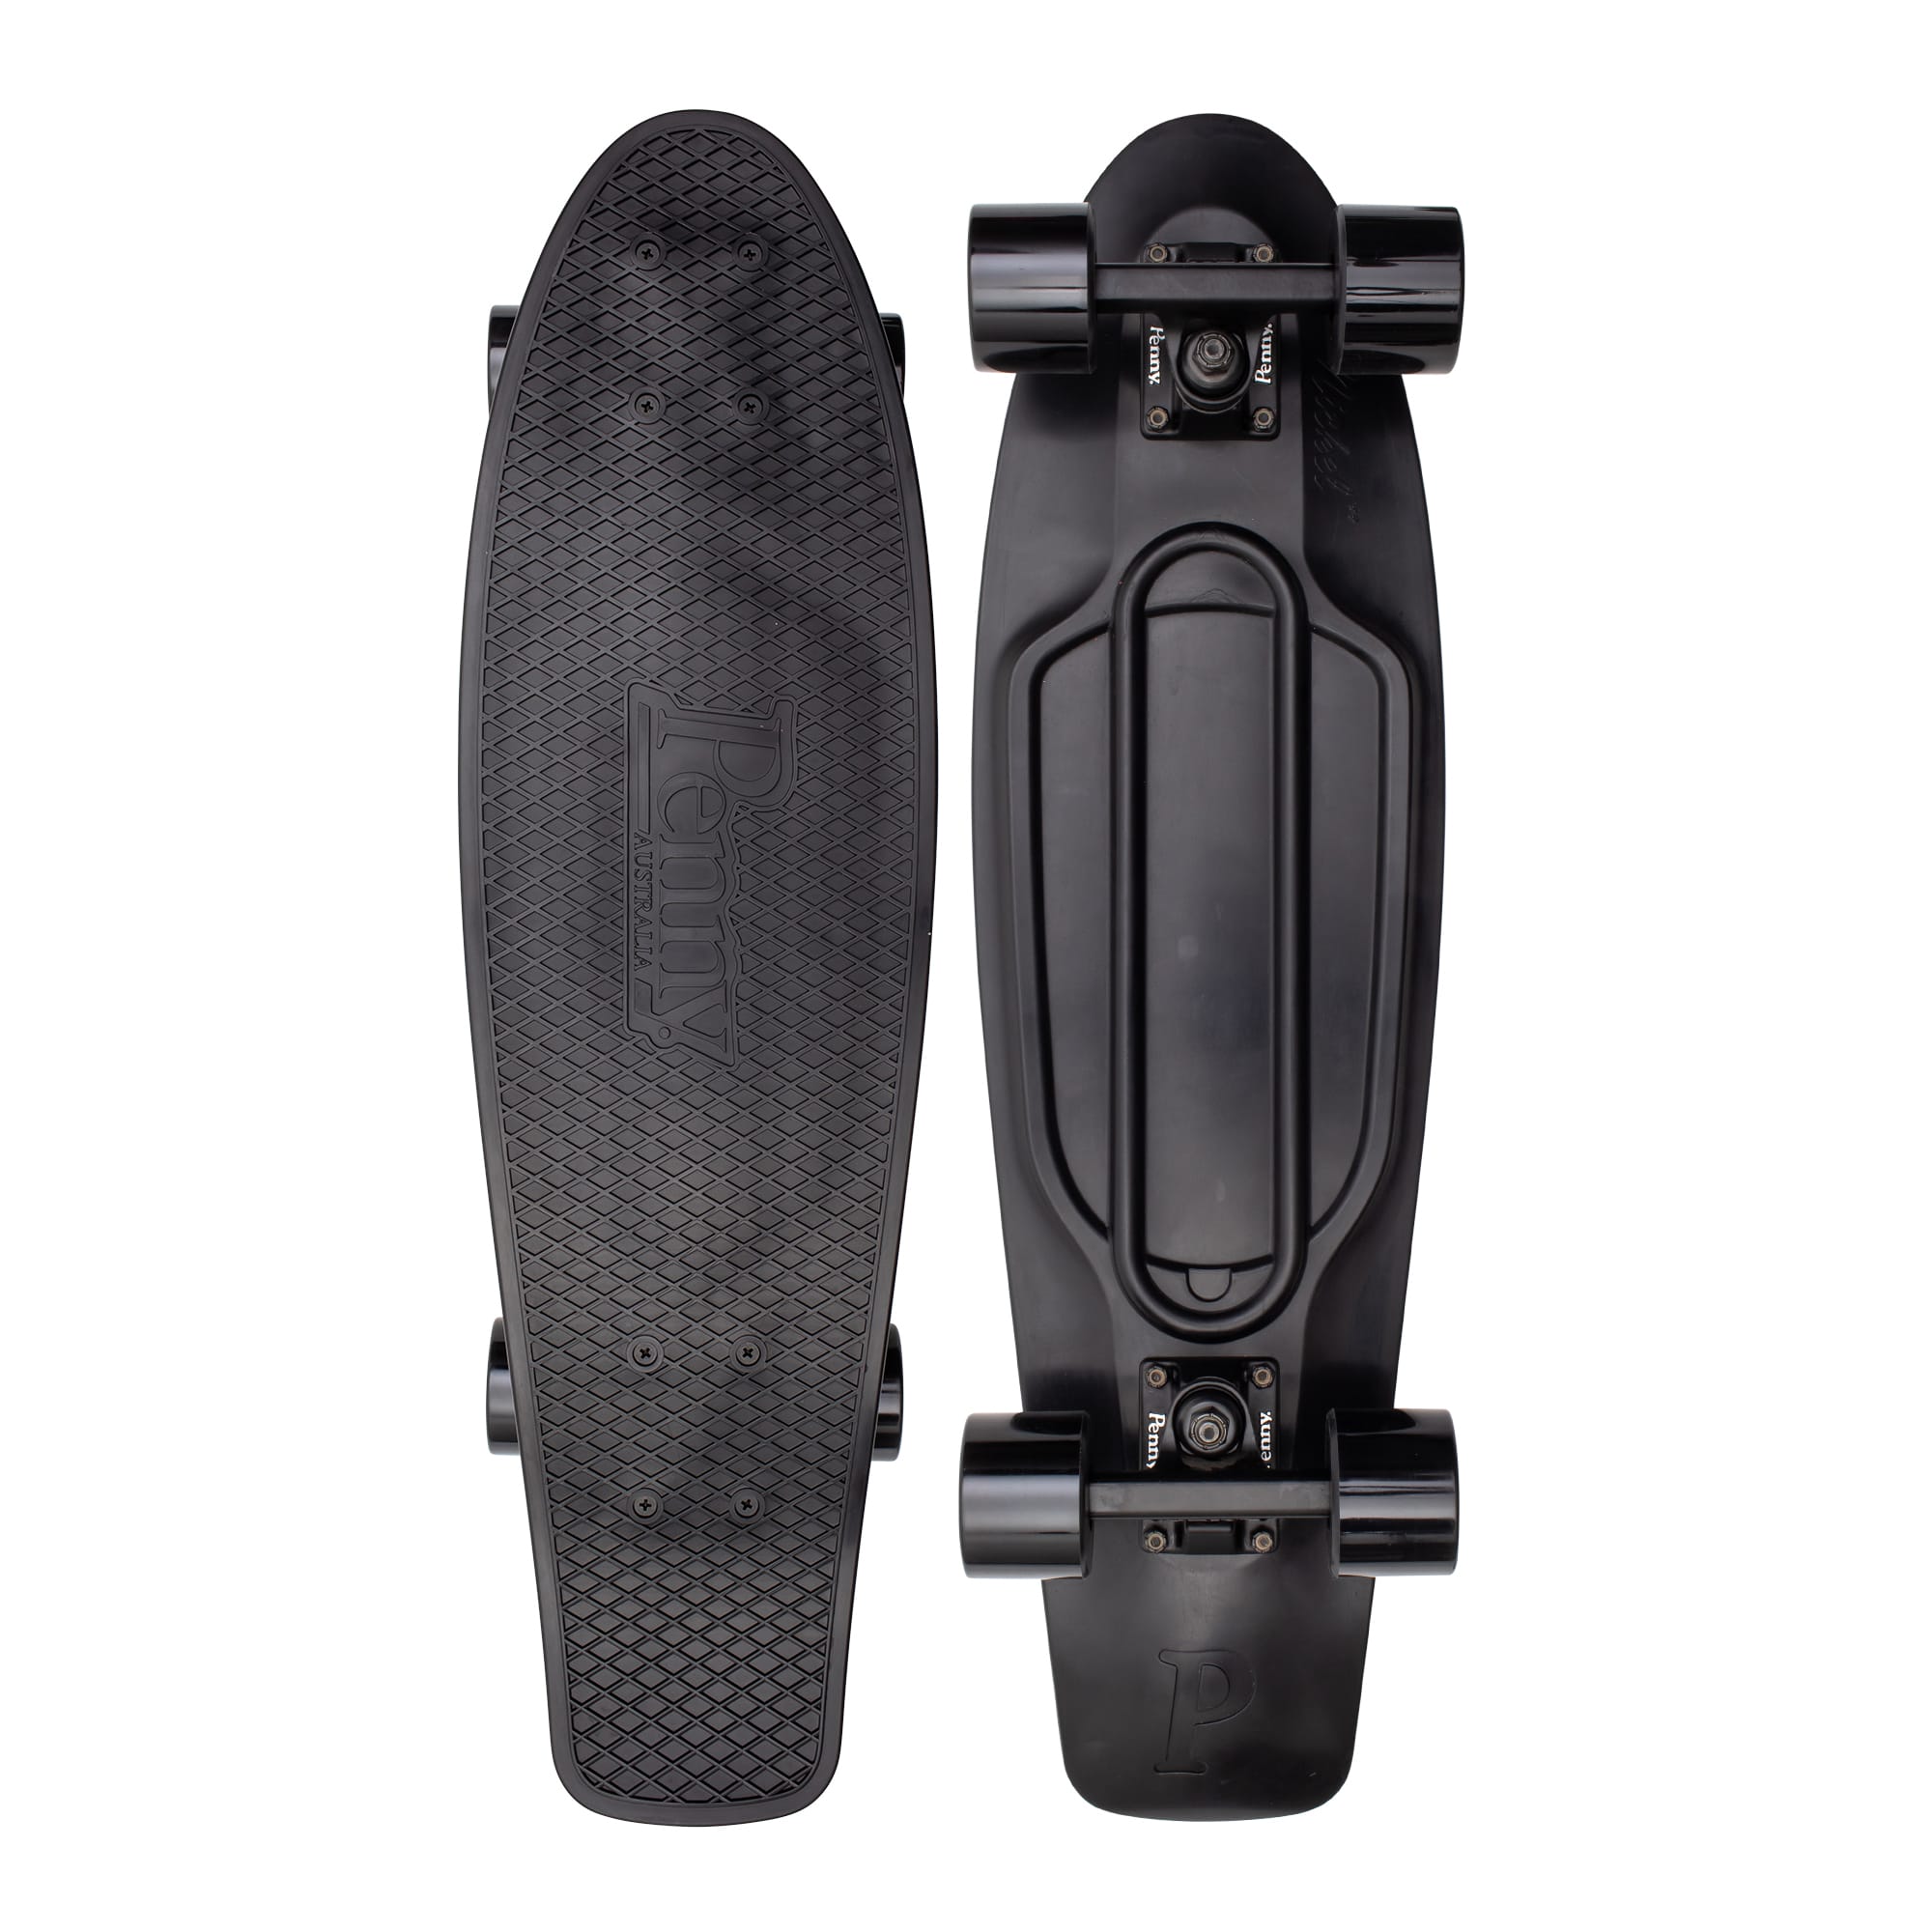 Blackout 27" Complete Cruiser Skateboard by Penny Penny